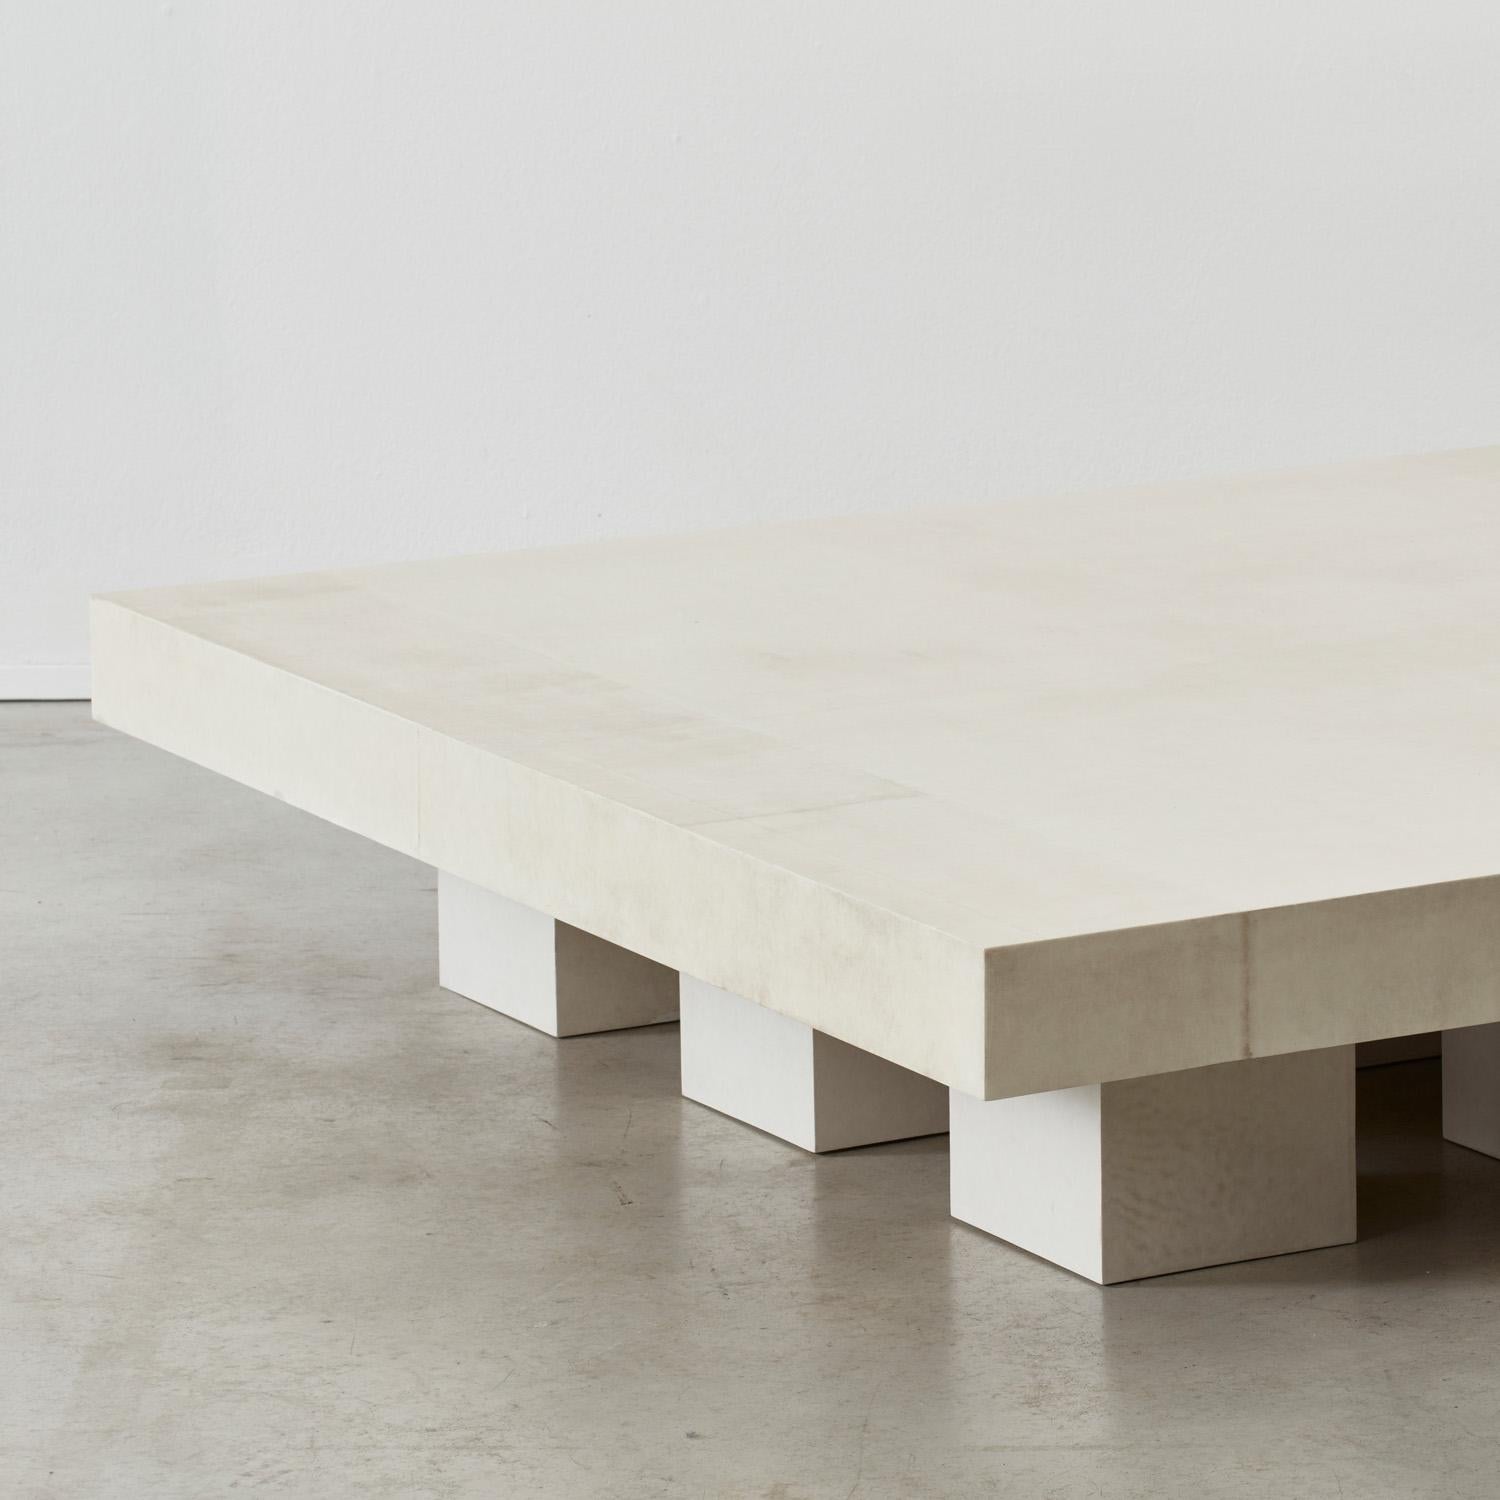 David Horan Paper Coffee Table for Béton Brut, UK, 2022 For Sale 2